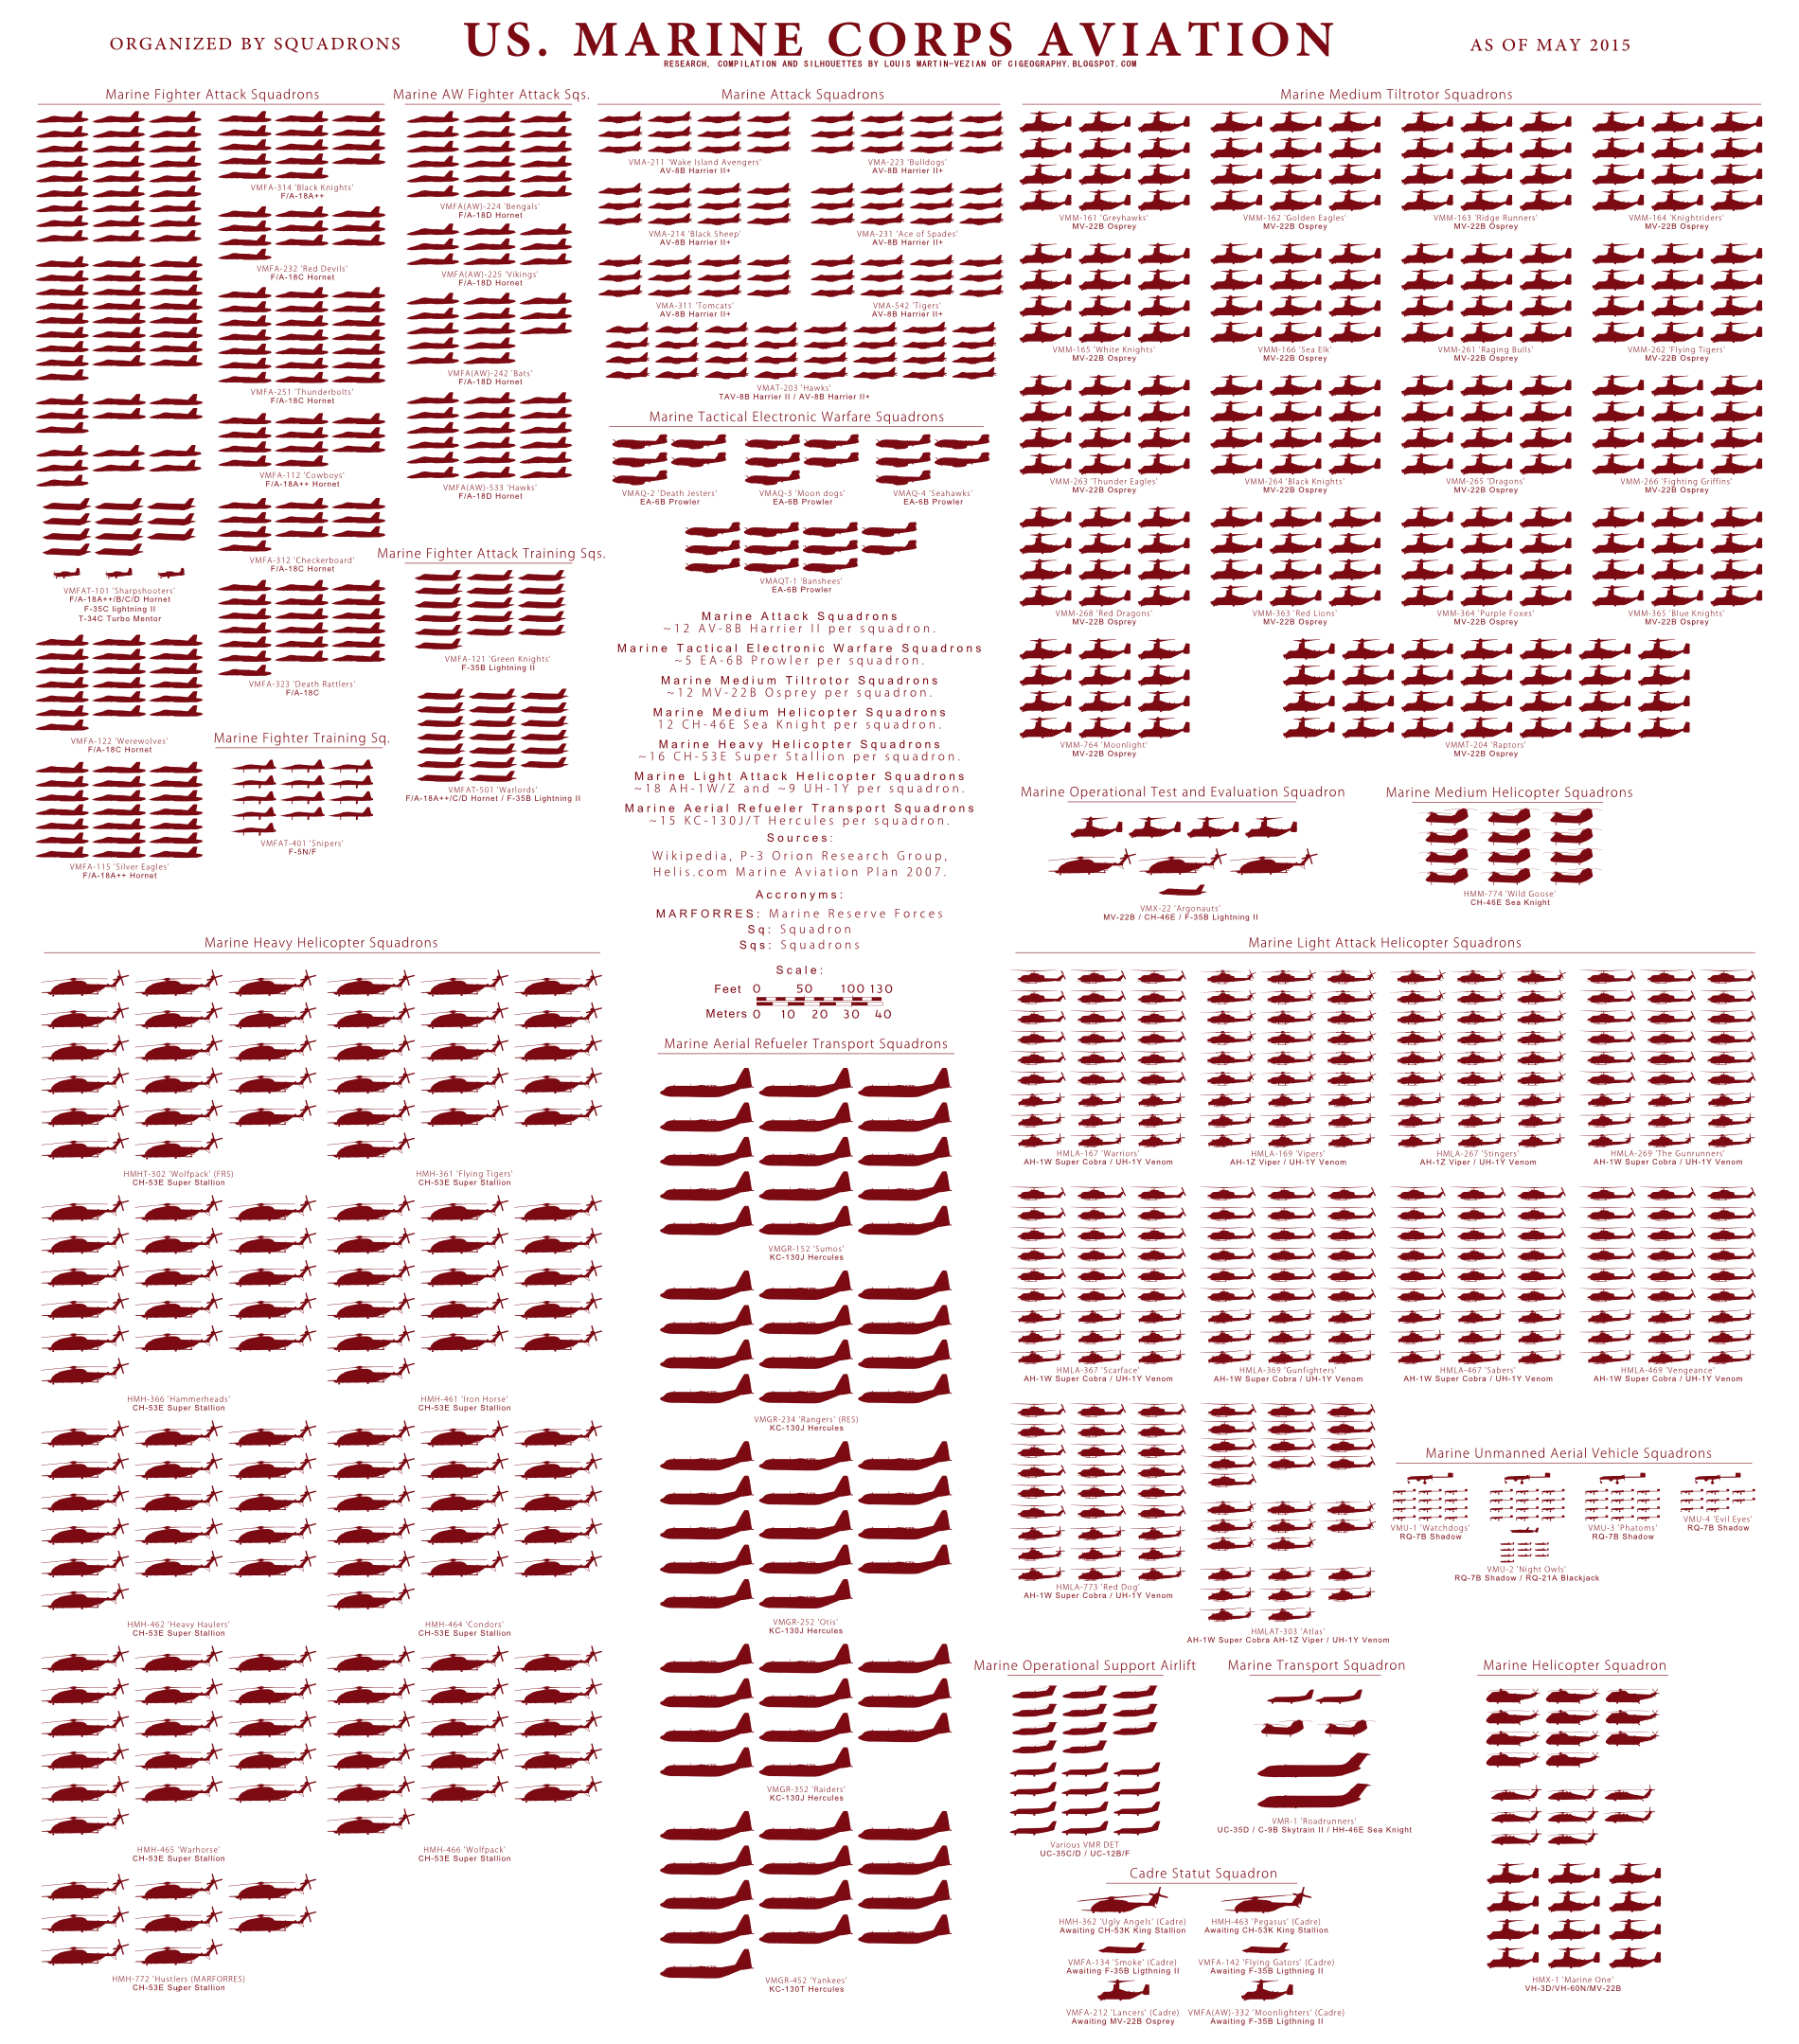 All the aircraft of the U.S. Marine Corps in a single chart Alert 5